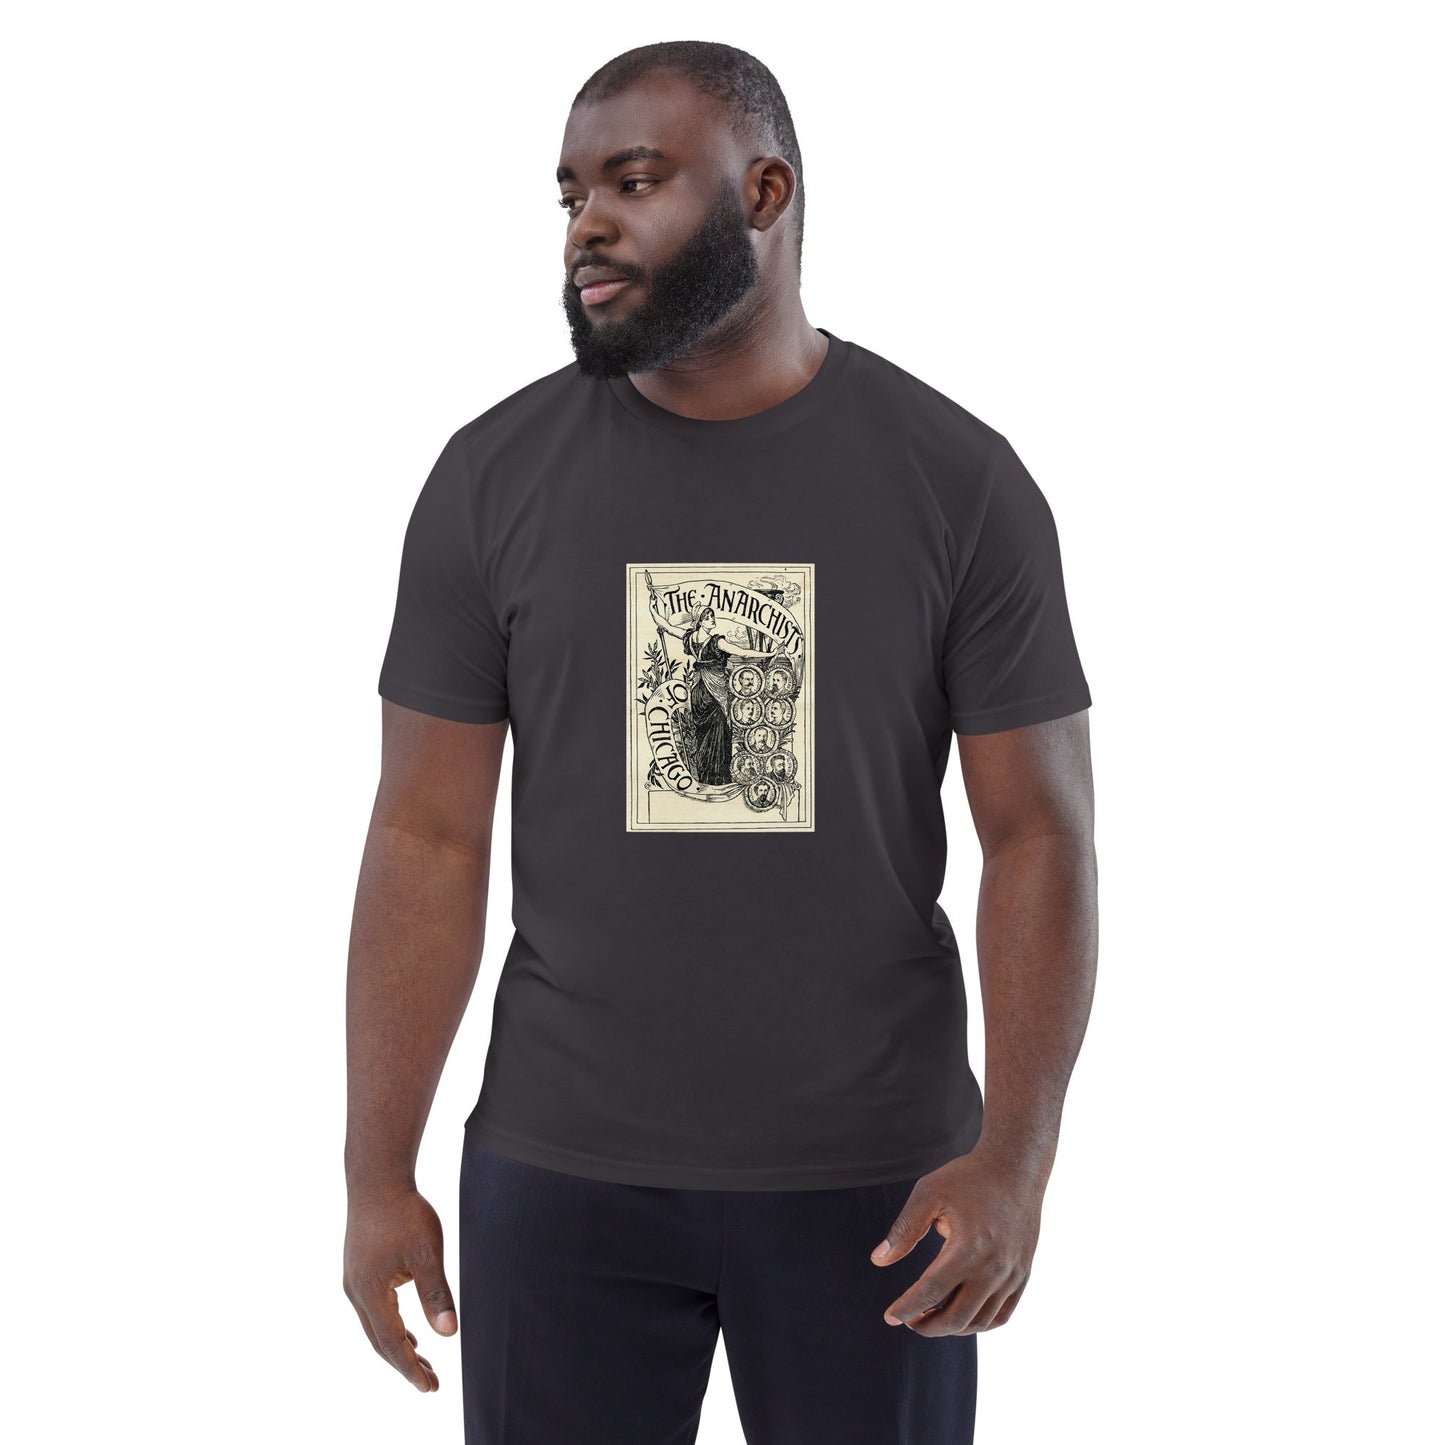 The Anarchists - Unisex organic cotton t-shirt - Souled Out World